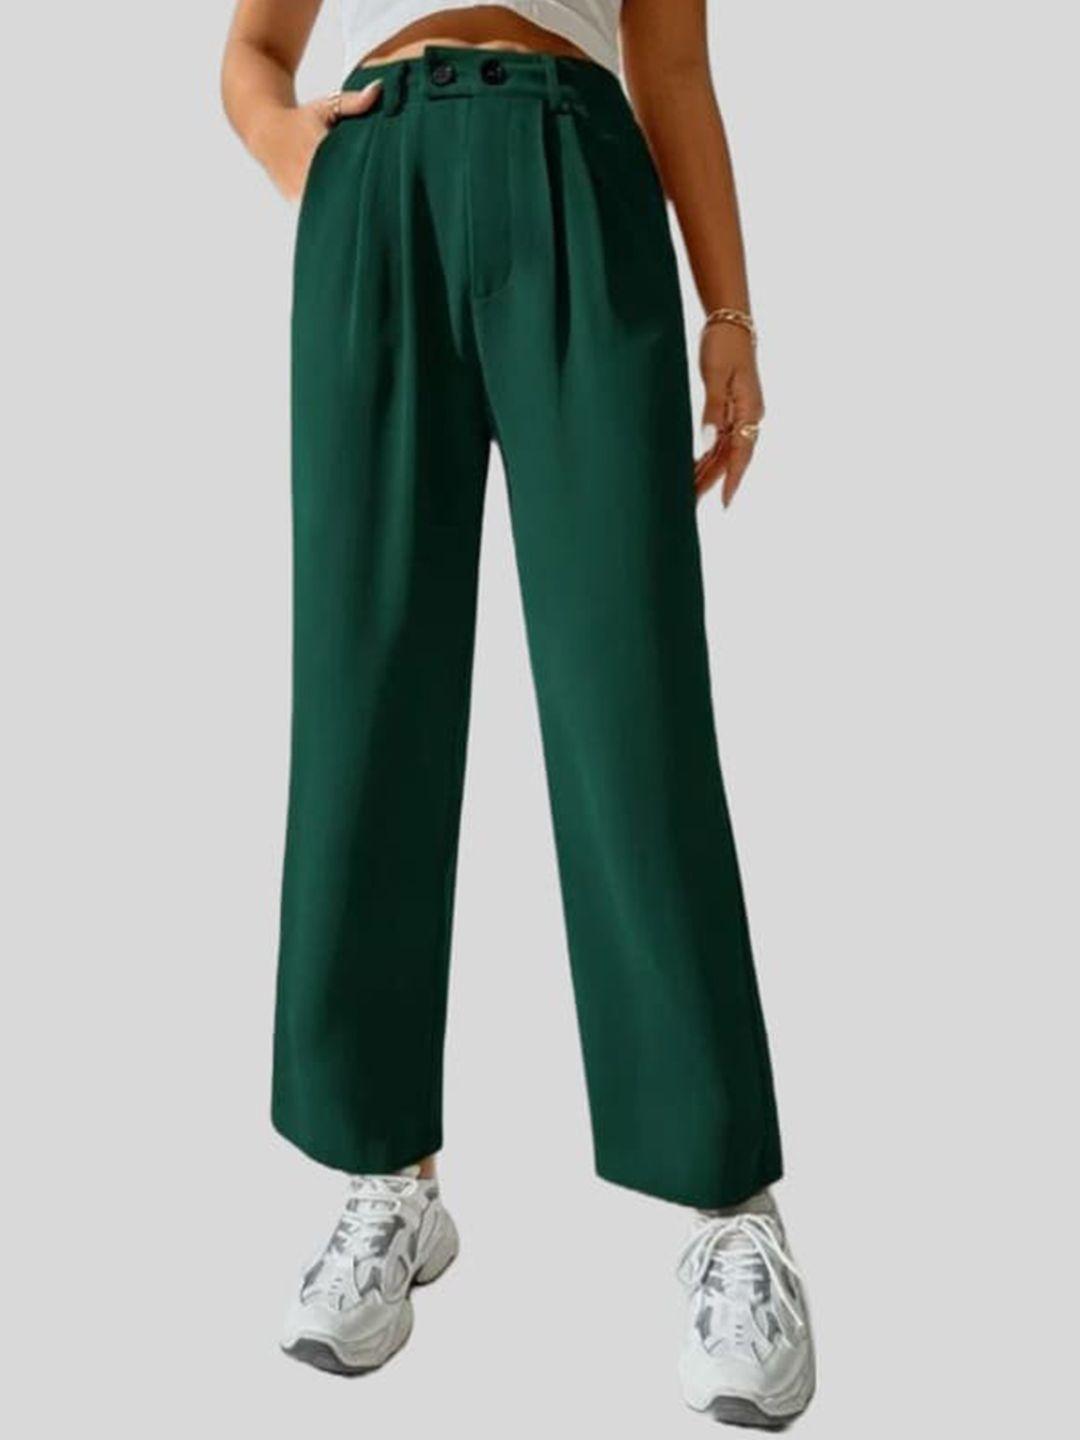 fnocks-women-comfort-pure-cotton-pleated-parallel-trousers